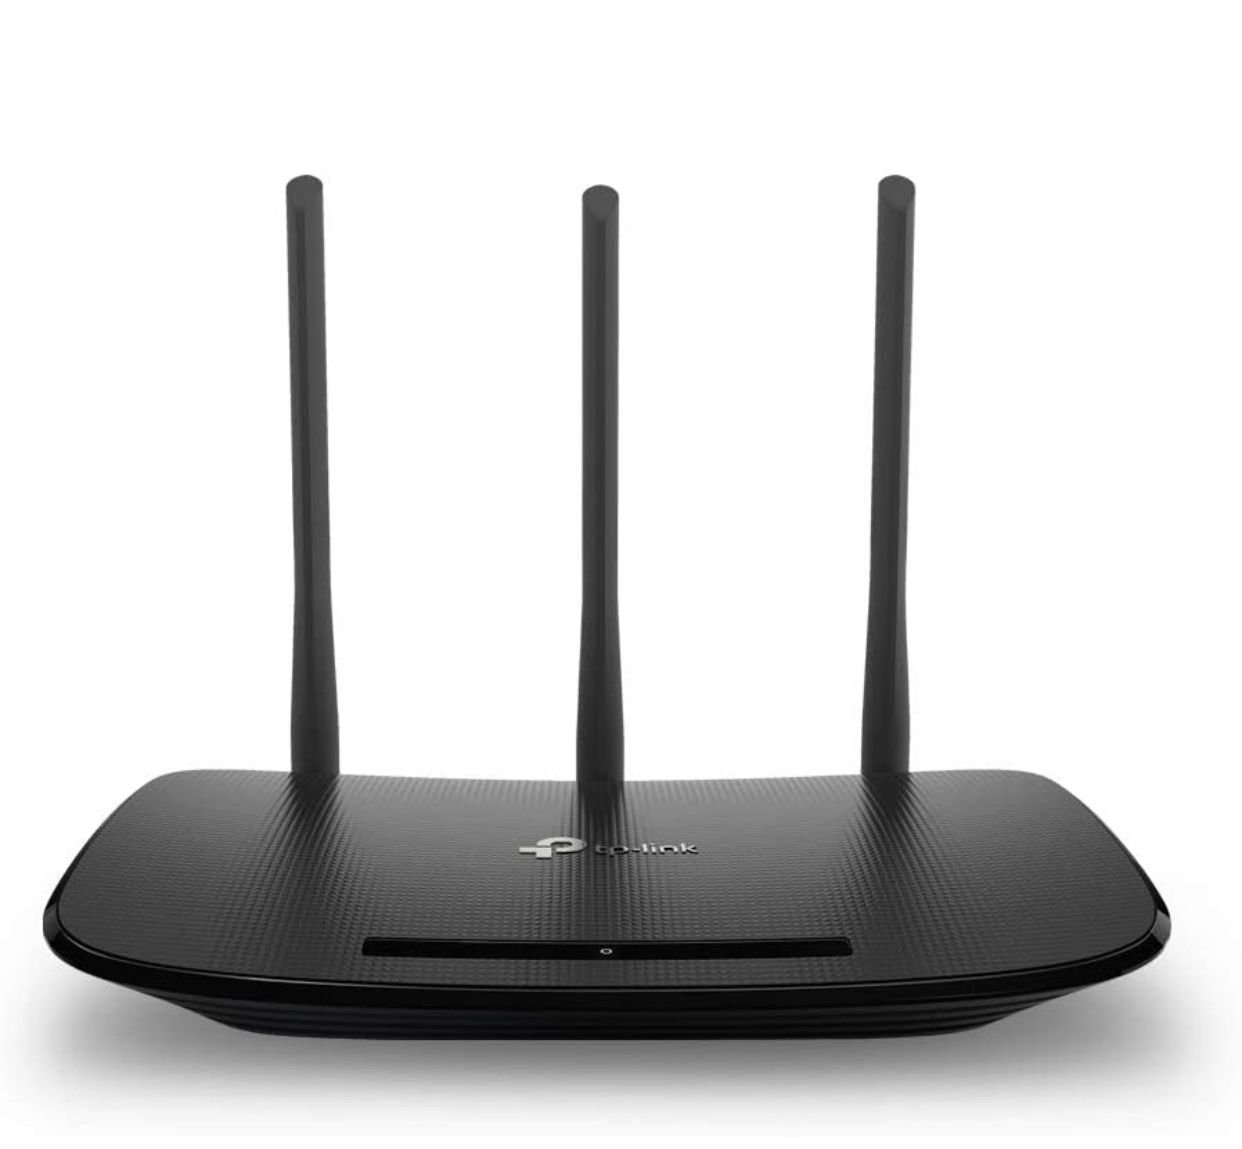 TP-Link N450 WiFi Router - Wireless Internet Router for Home (TL-WR940N) & TP-Link 5 Port